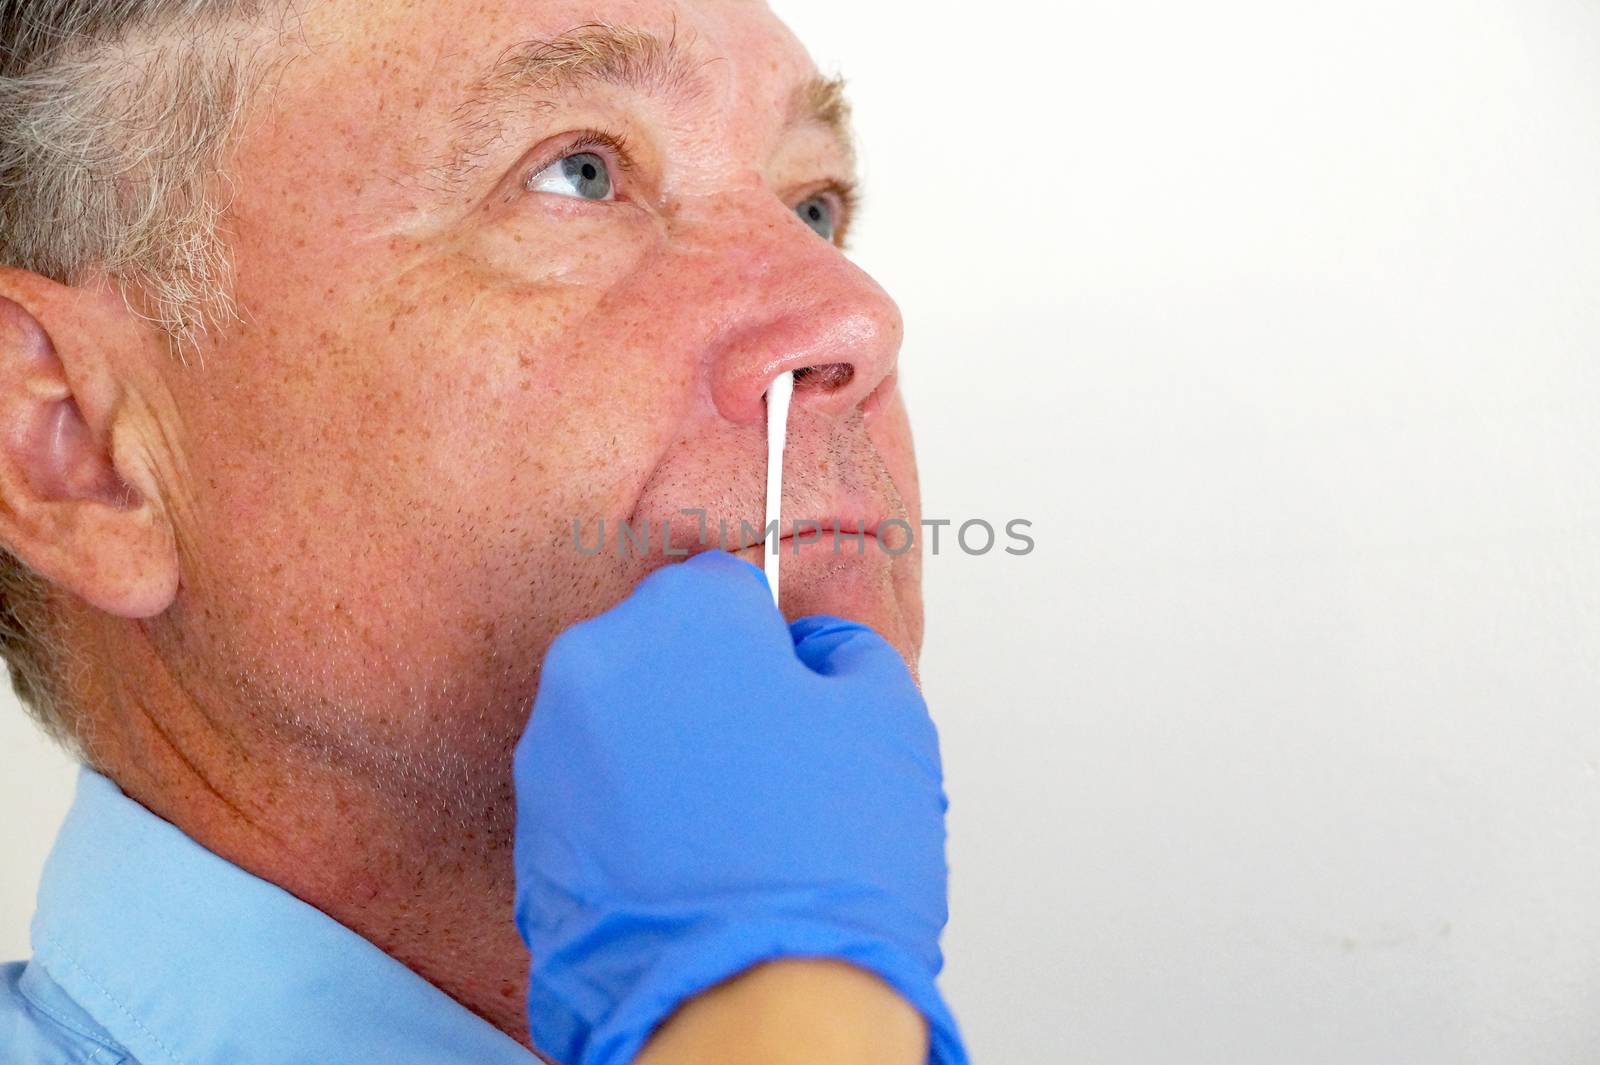 the doctor takes a test for coronavirus from the man's nose by Annado